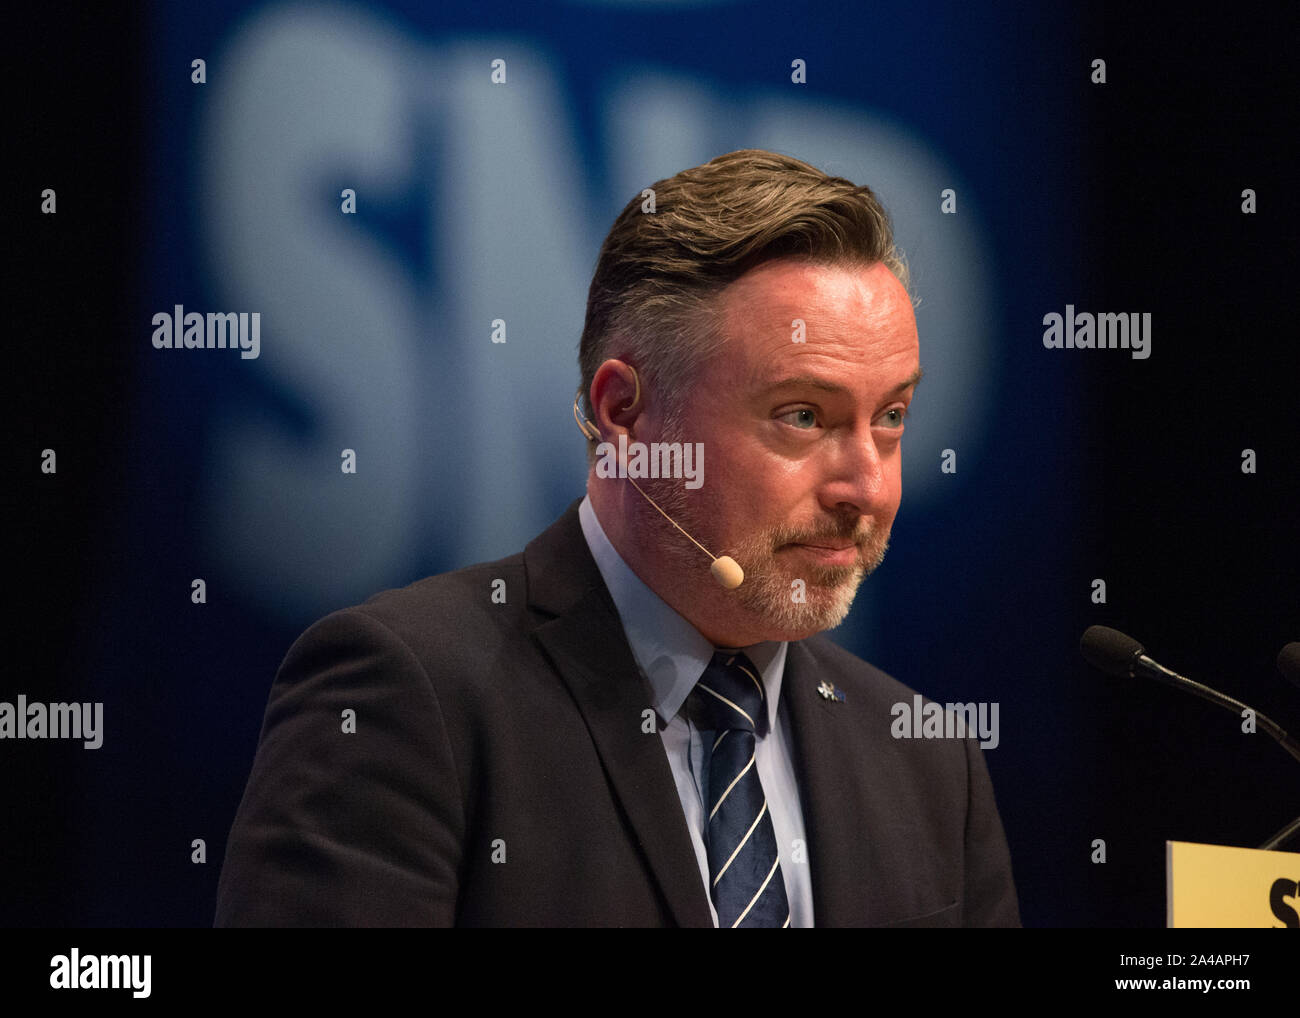 Aberdeen, UK. 13 October 2019.  Pictured: Alan Smith MEP.  Brexit discussions at the Scottish National Party (SNP) Conference at the Aberdeen Exhibition Conference Centre (AECC). Credit: Colin Fisher/Alamy Live News Stock Photo